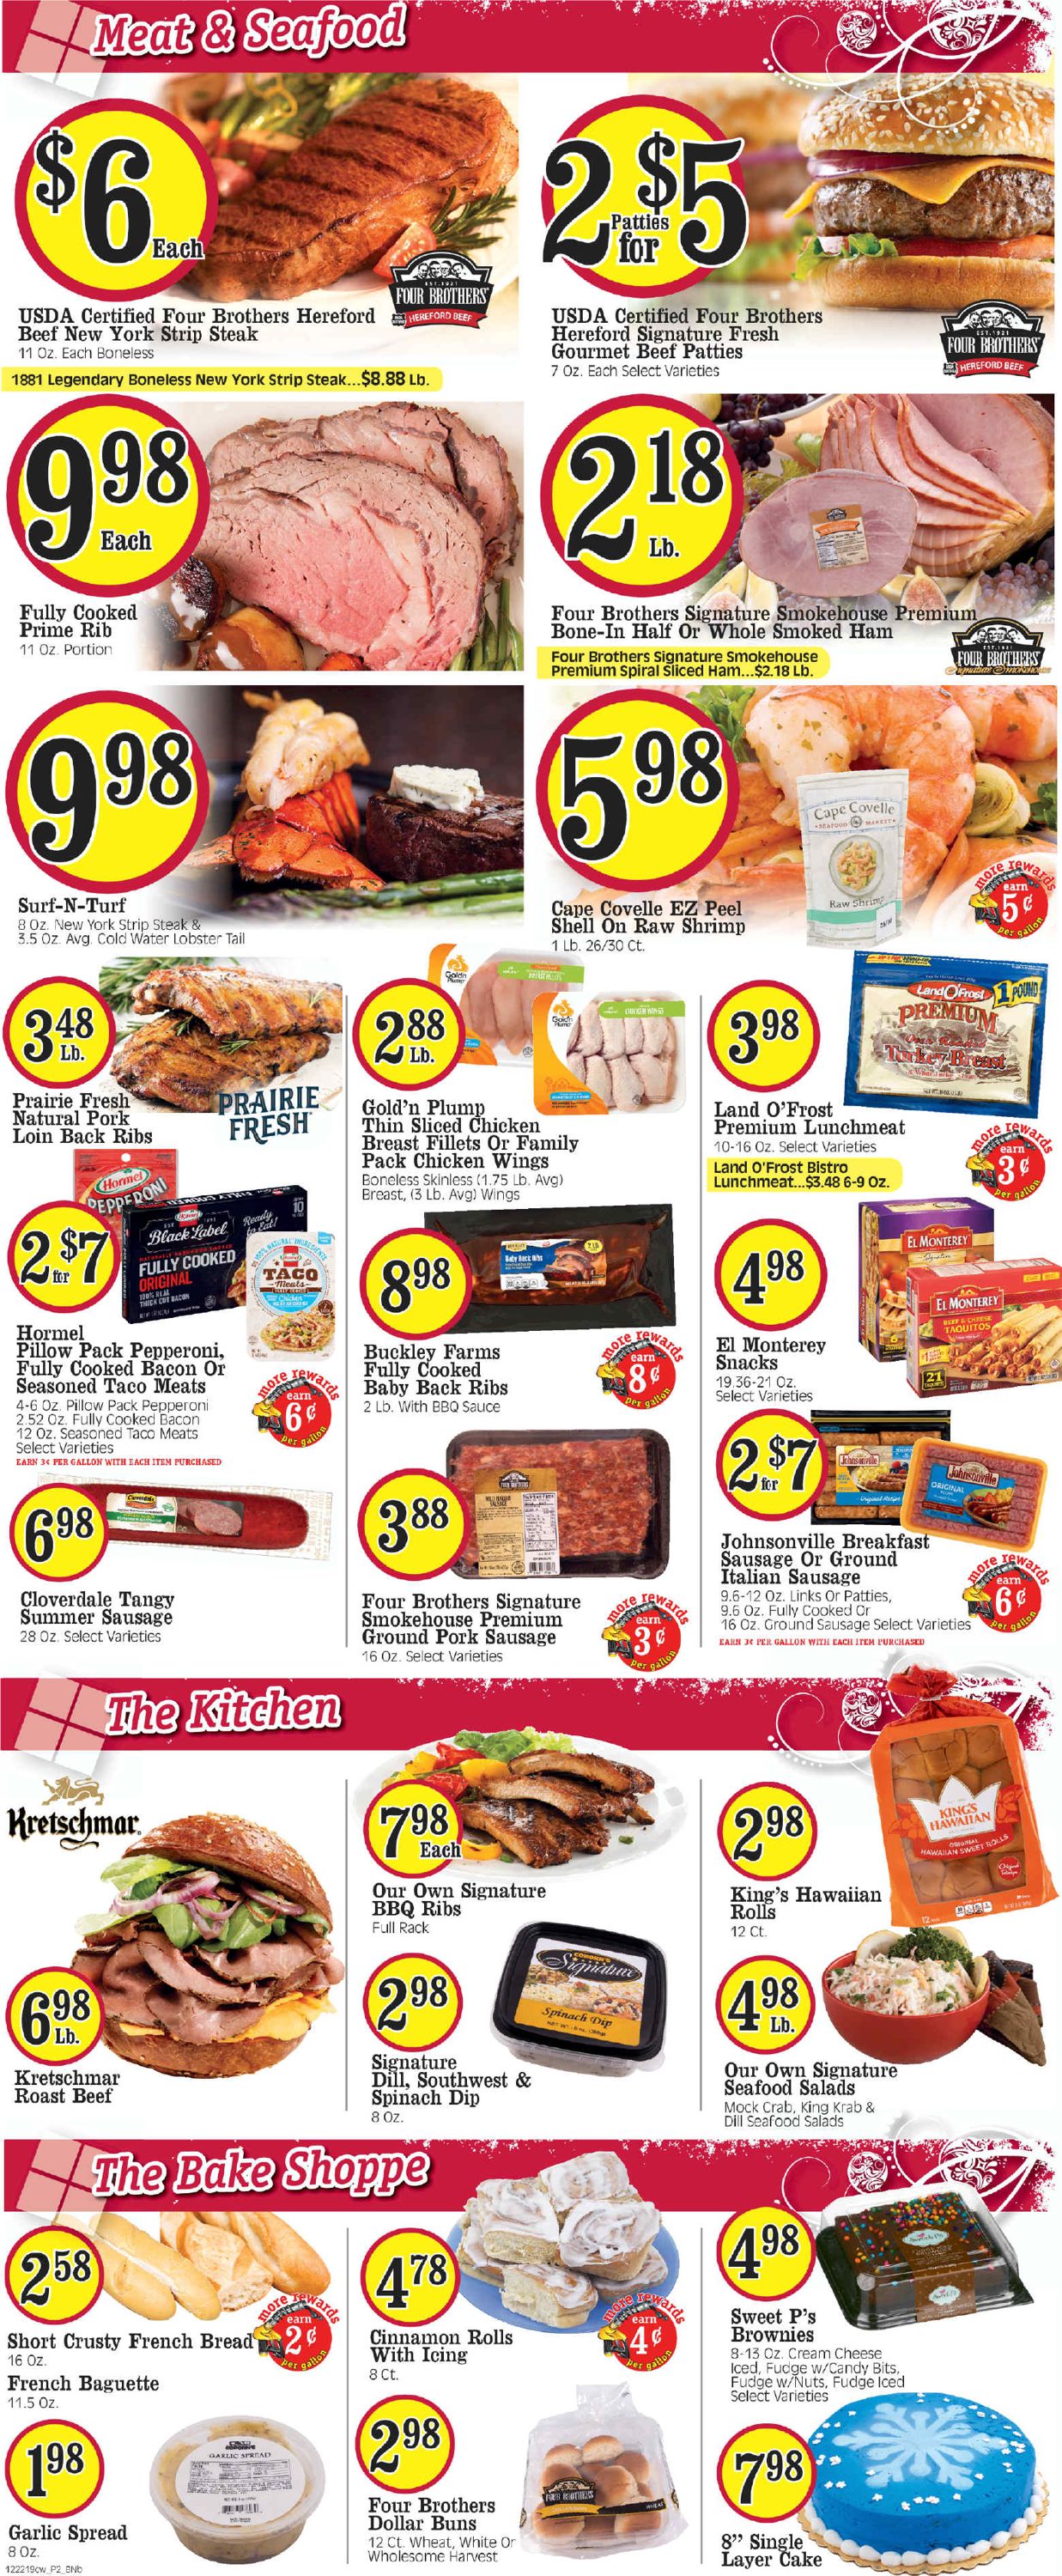 Cash Wise - New Year's Ad 2019/2020 Weekly Ad Circular - valid 12/25-12/31/2019 (Page 2)